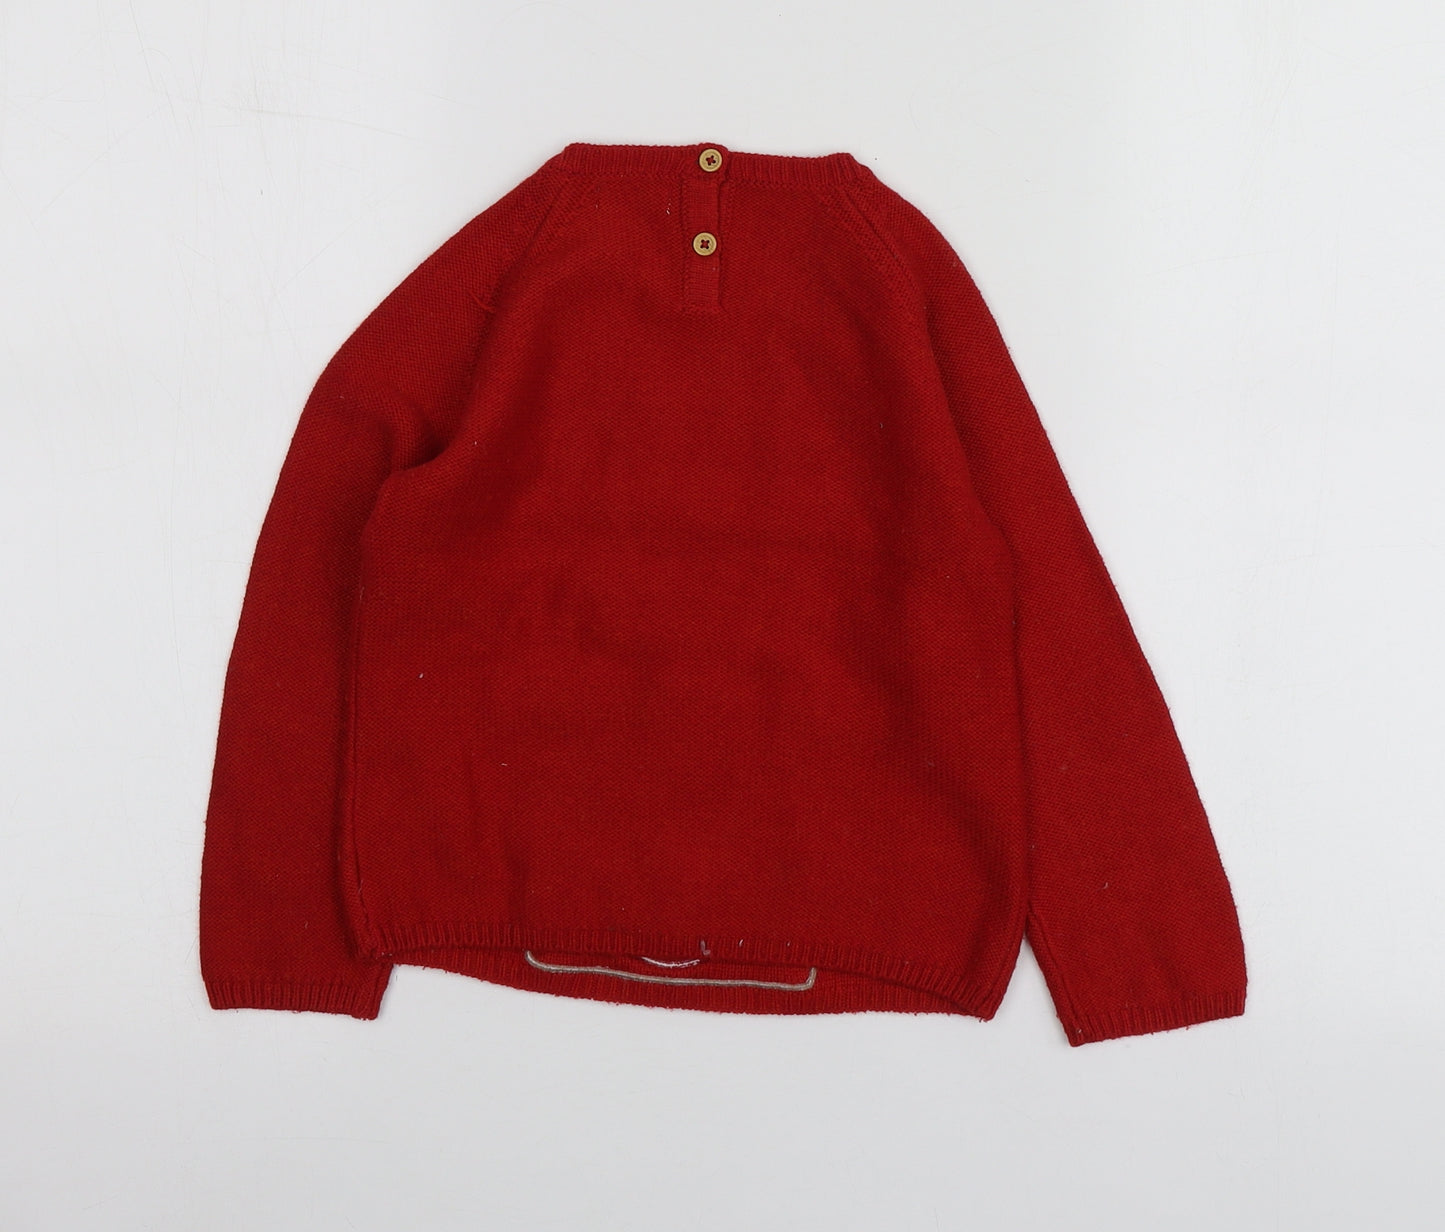 NEXT Boys Red Round Neck Geometric Acrylic Pullover Jumper Size 4-5 Years